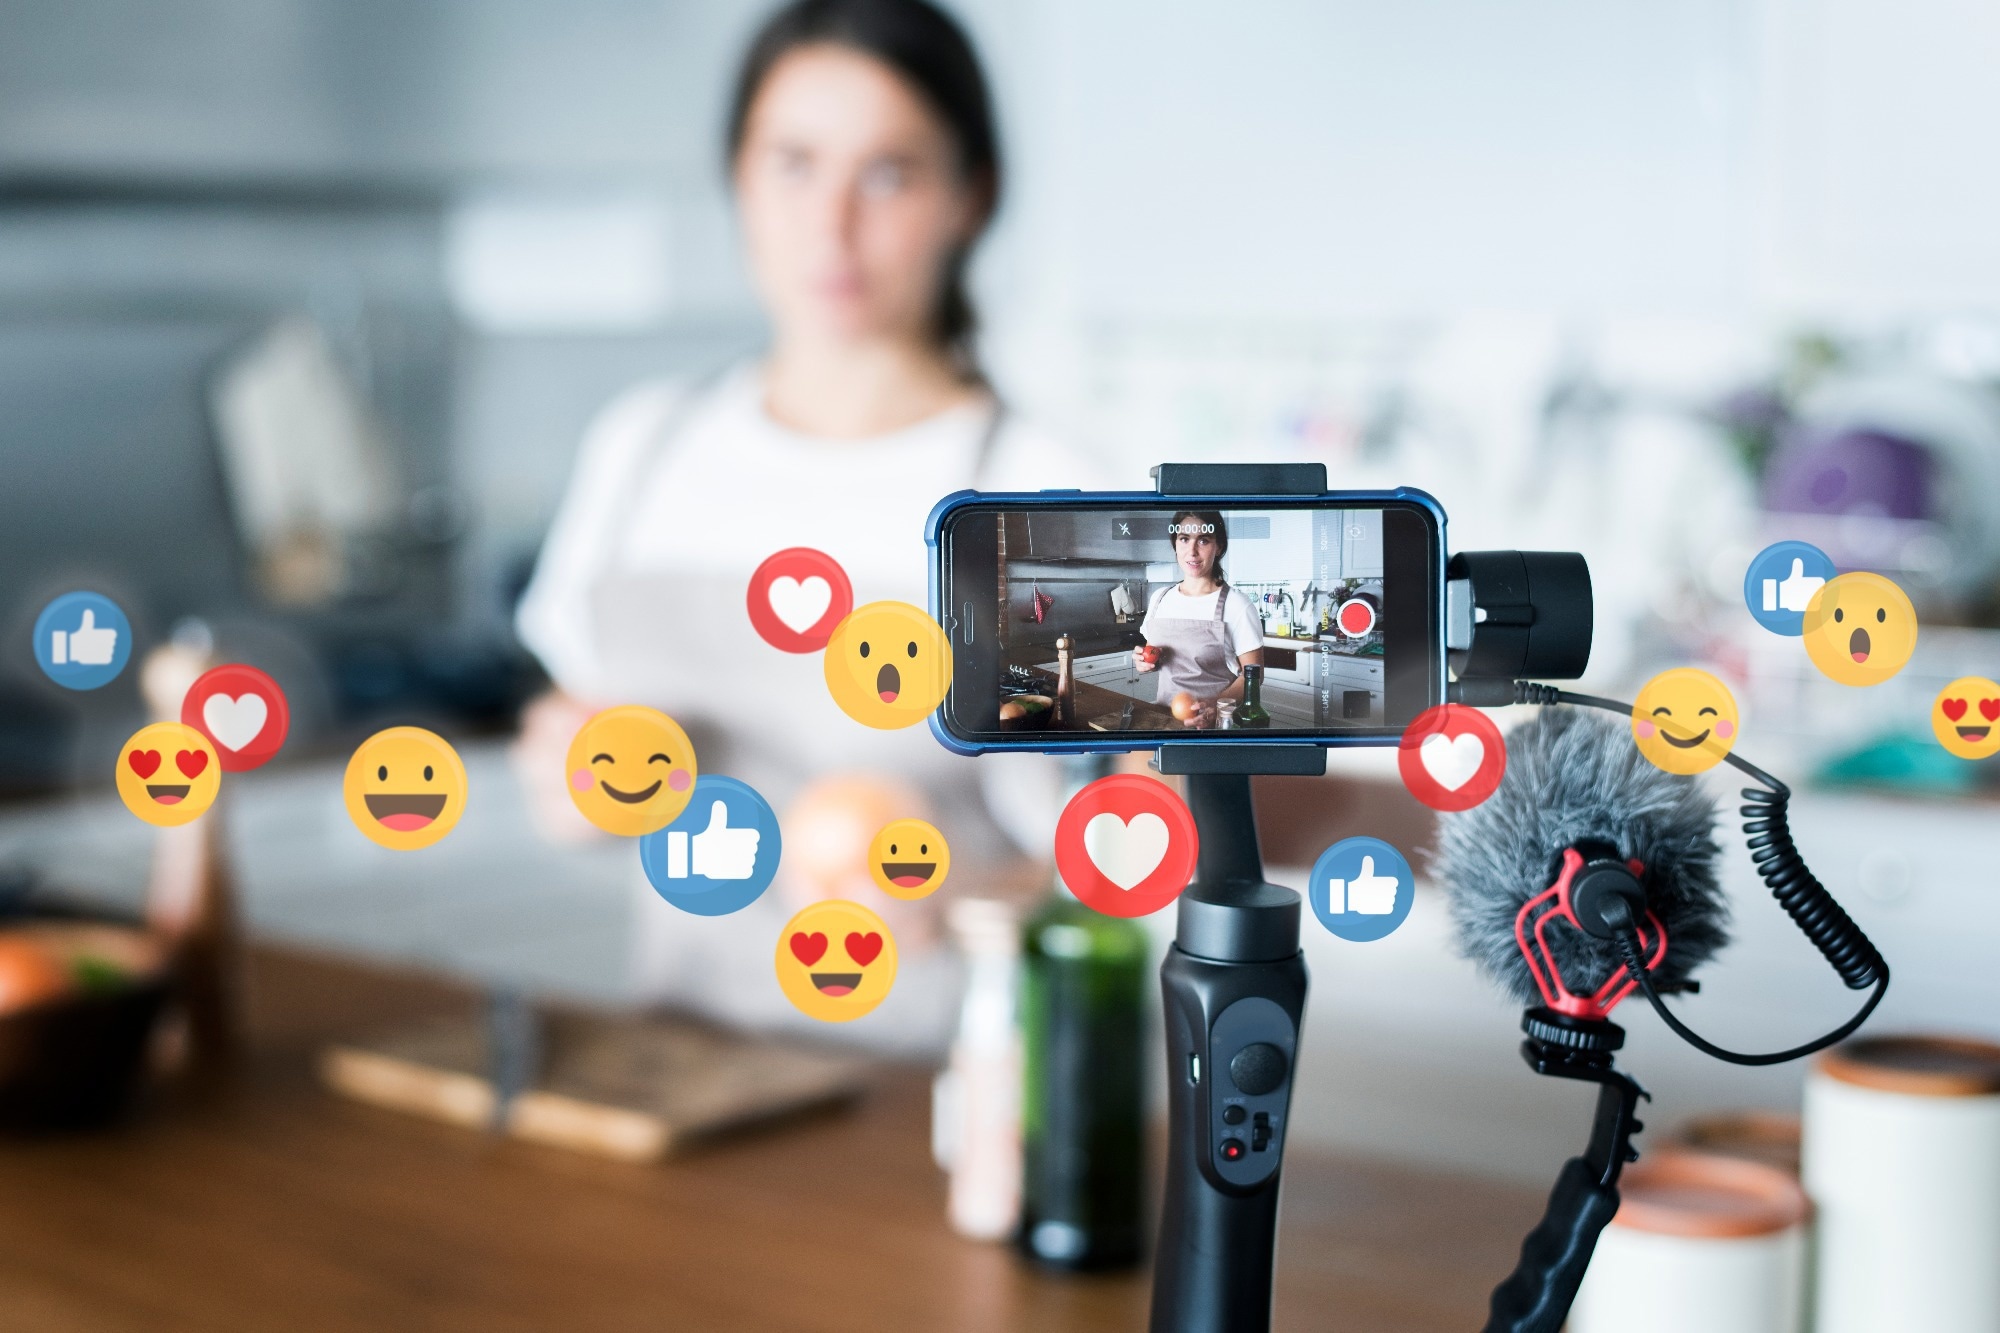 Study: The impact of social media influencers on pregnancy, birth, and early parenting experiences: A systematic review. Image Credit: Rawpixel.com / Shutterstock